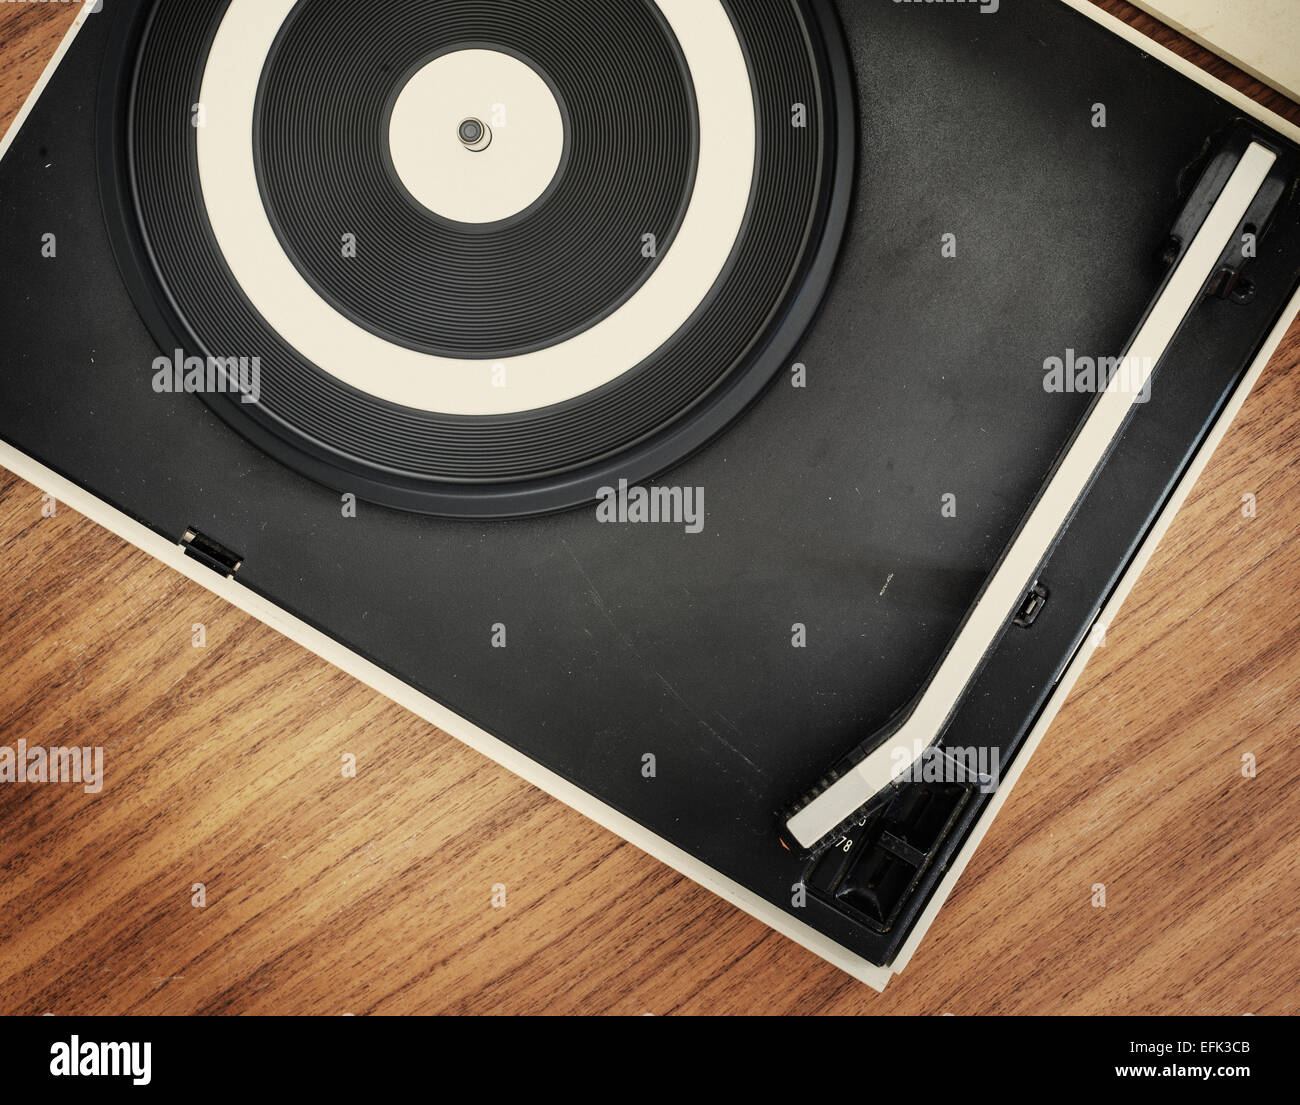 Old fashioned record player on wooden table Banque D'Images